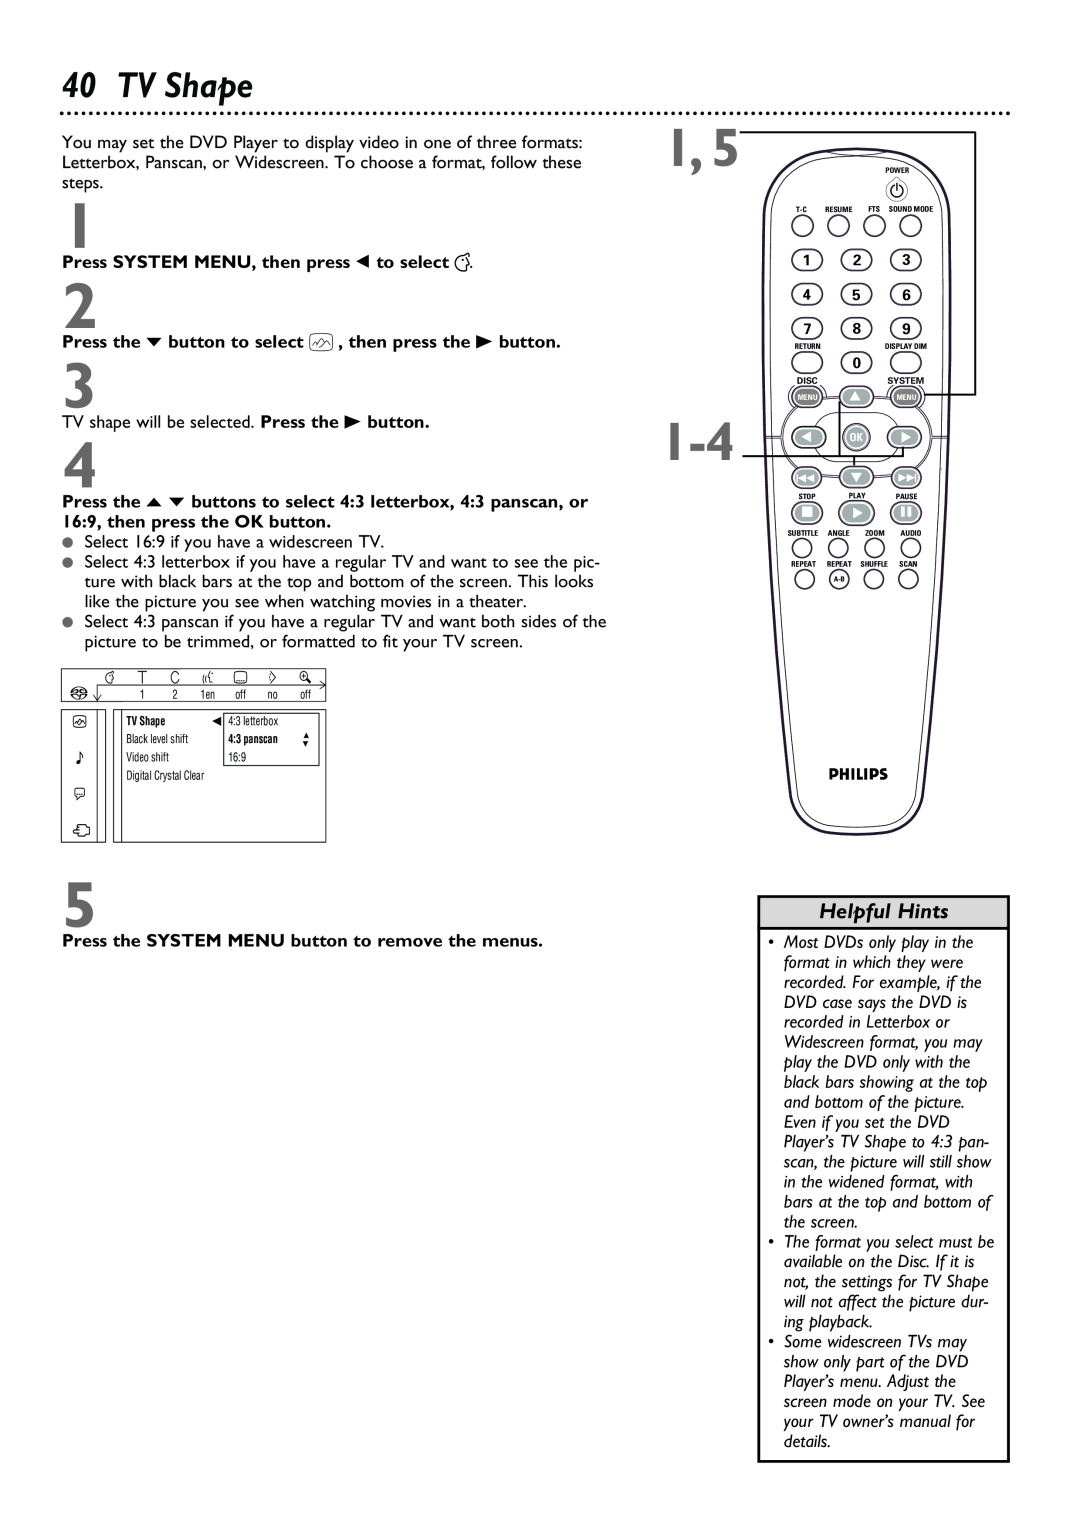 Philips DVD962SA owner manual TV Shape, Helpful Hints, details 